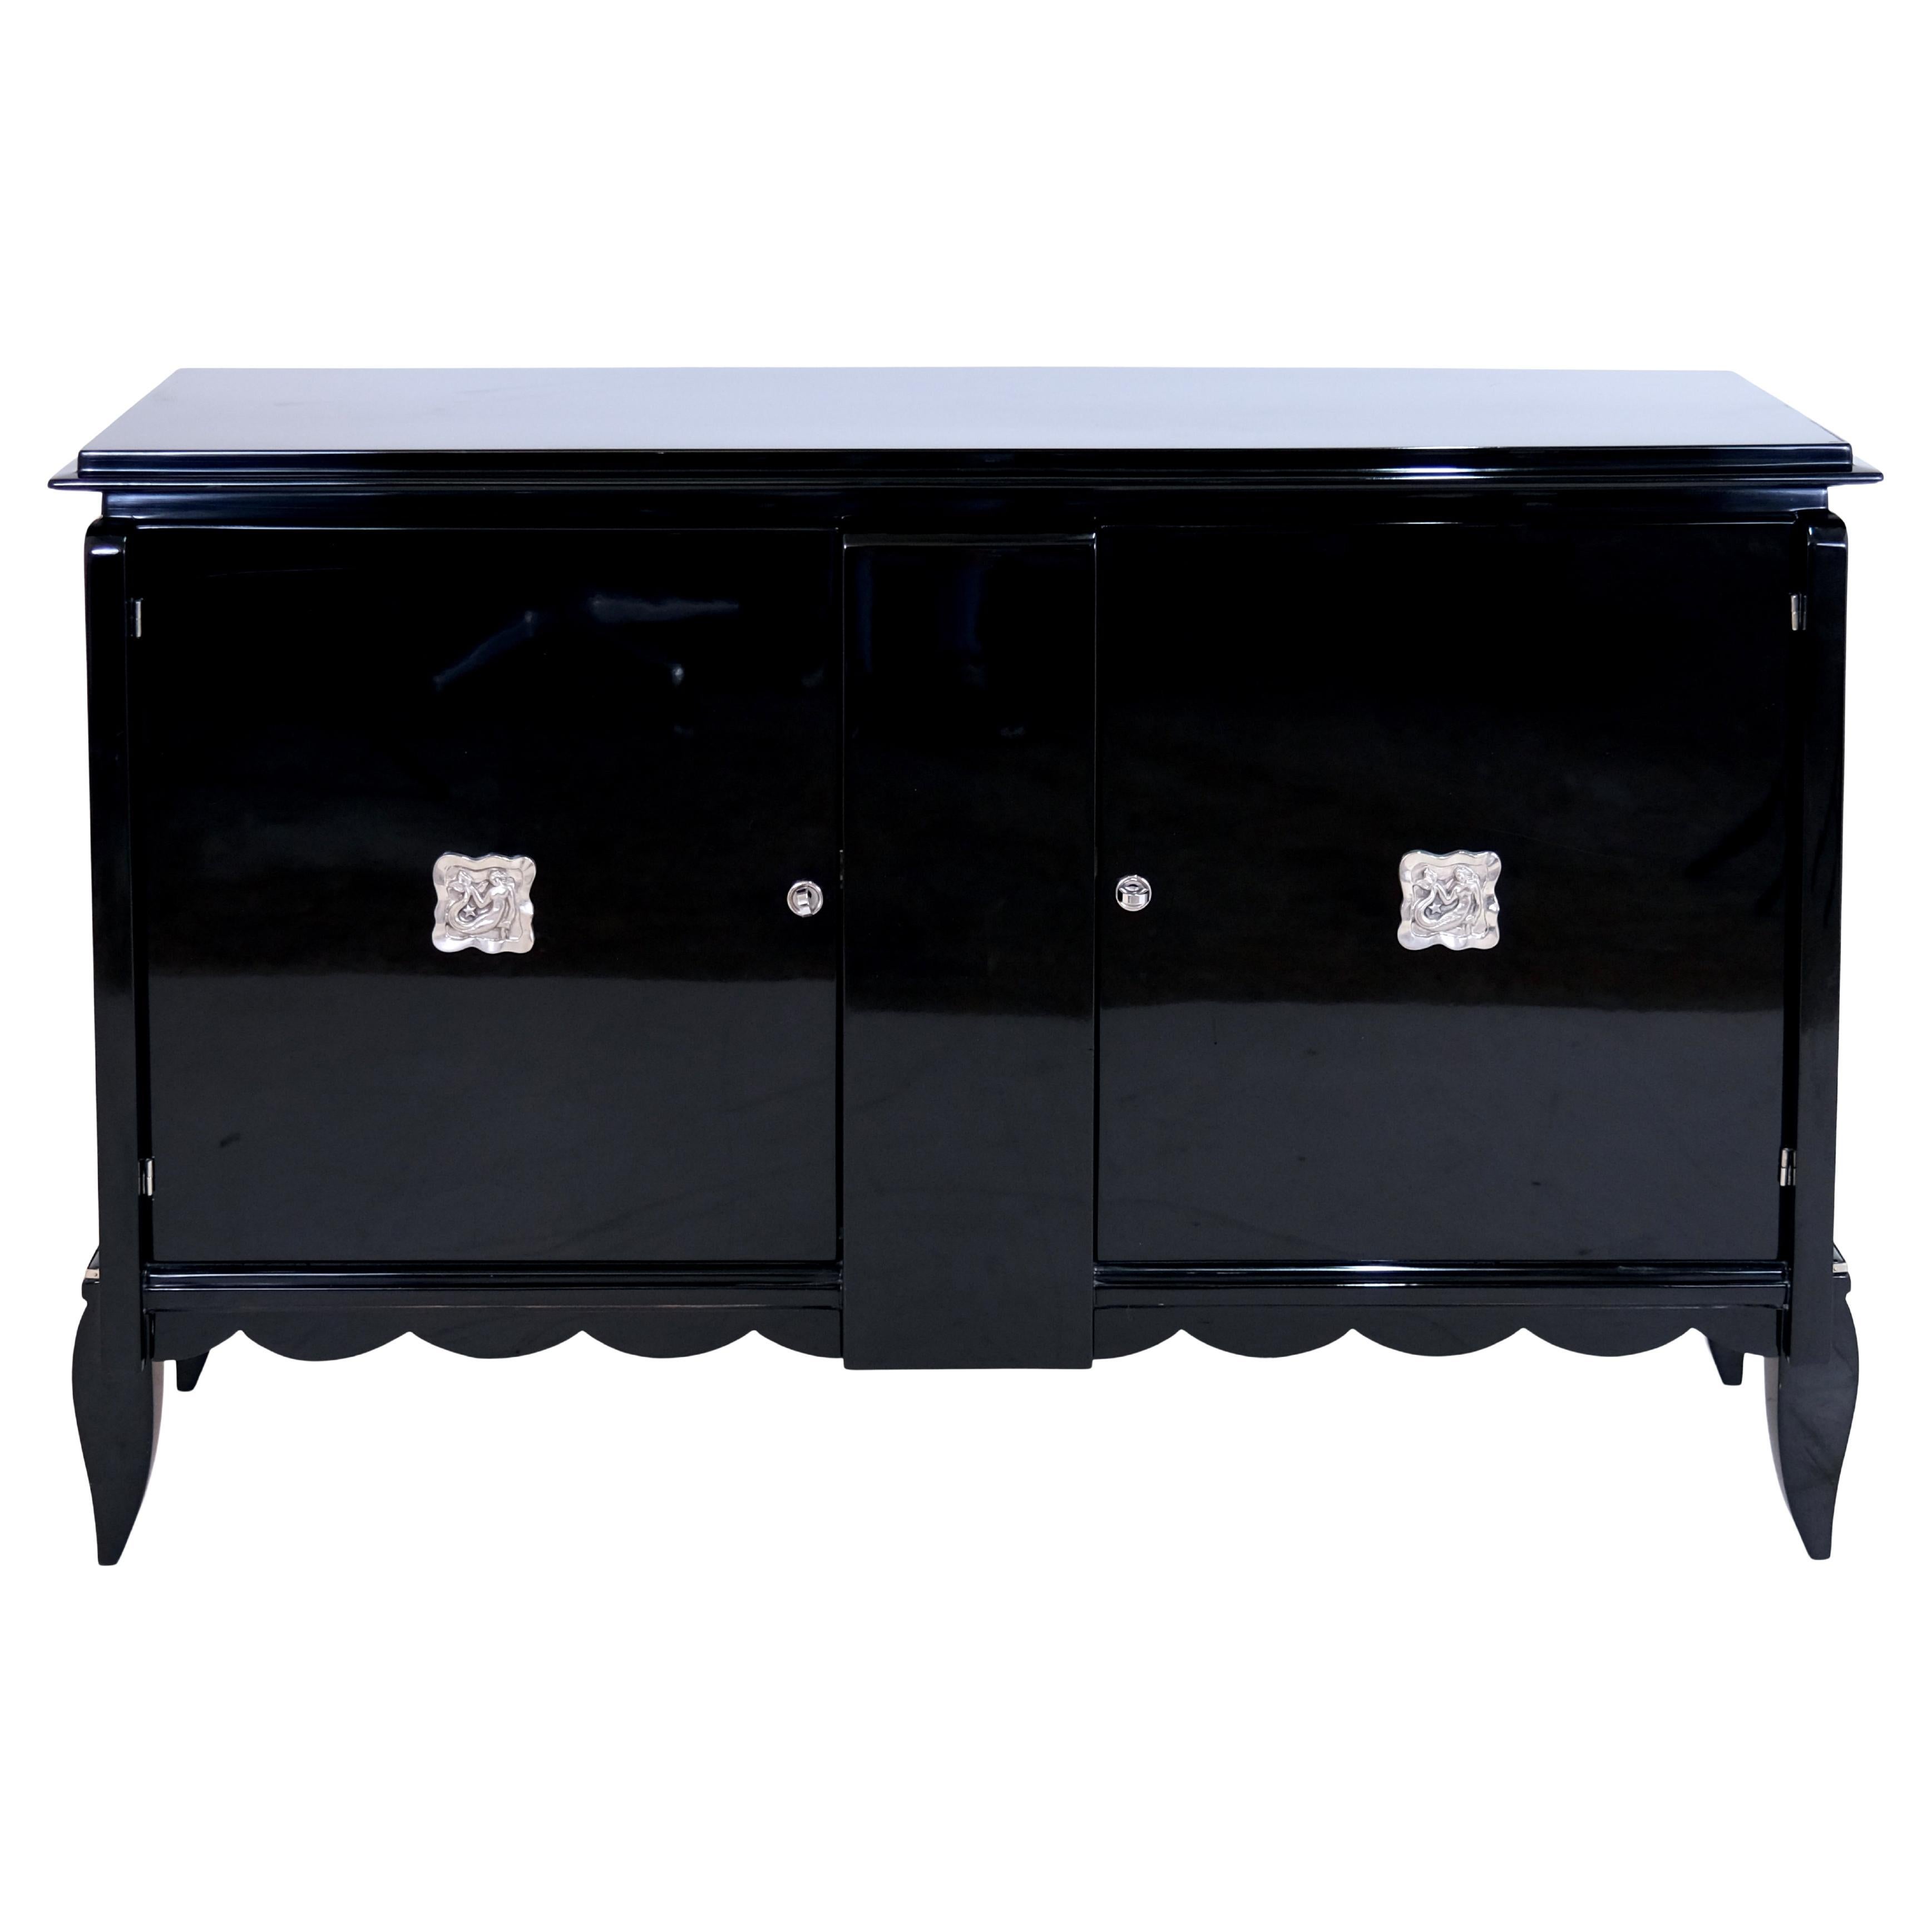 1930s French Art Deco Sideboard in Black Piano Lacquer with Chromed Emblems